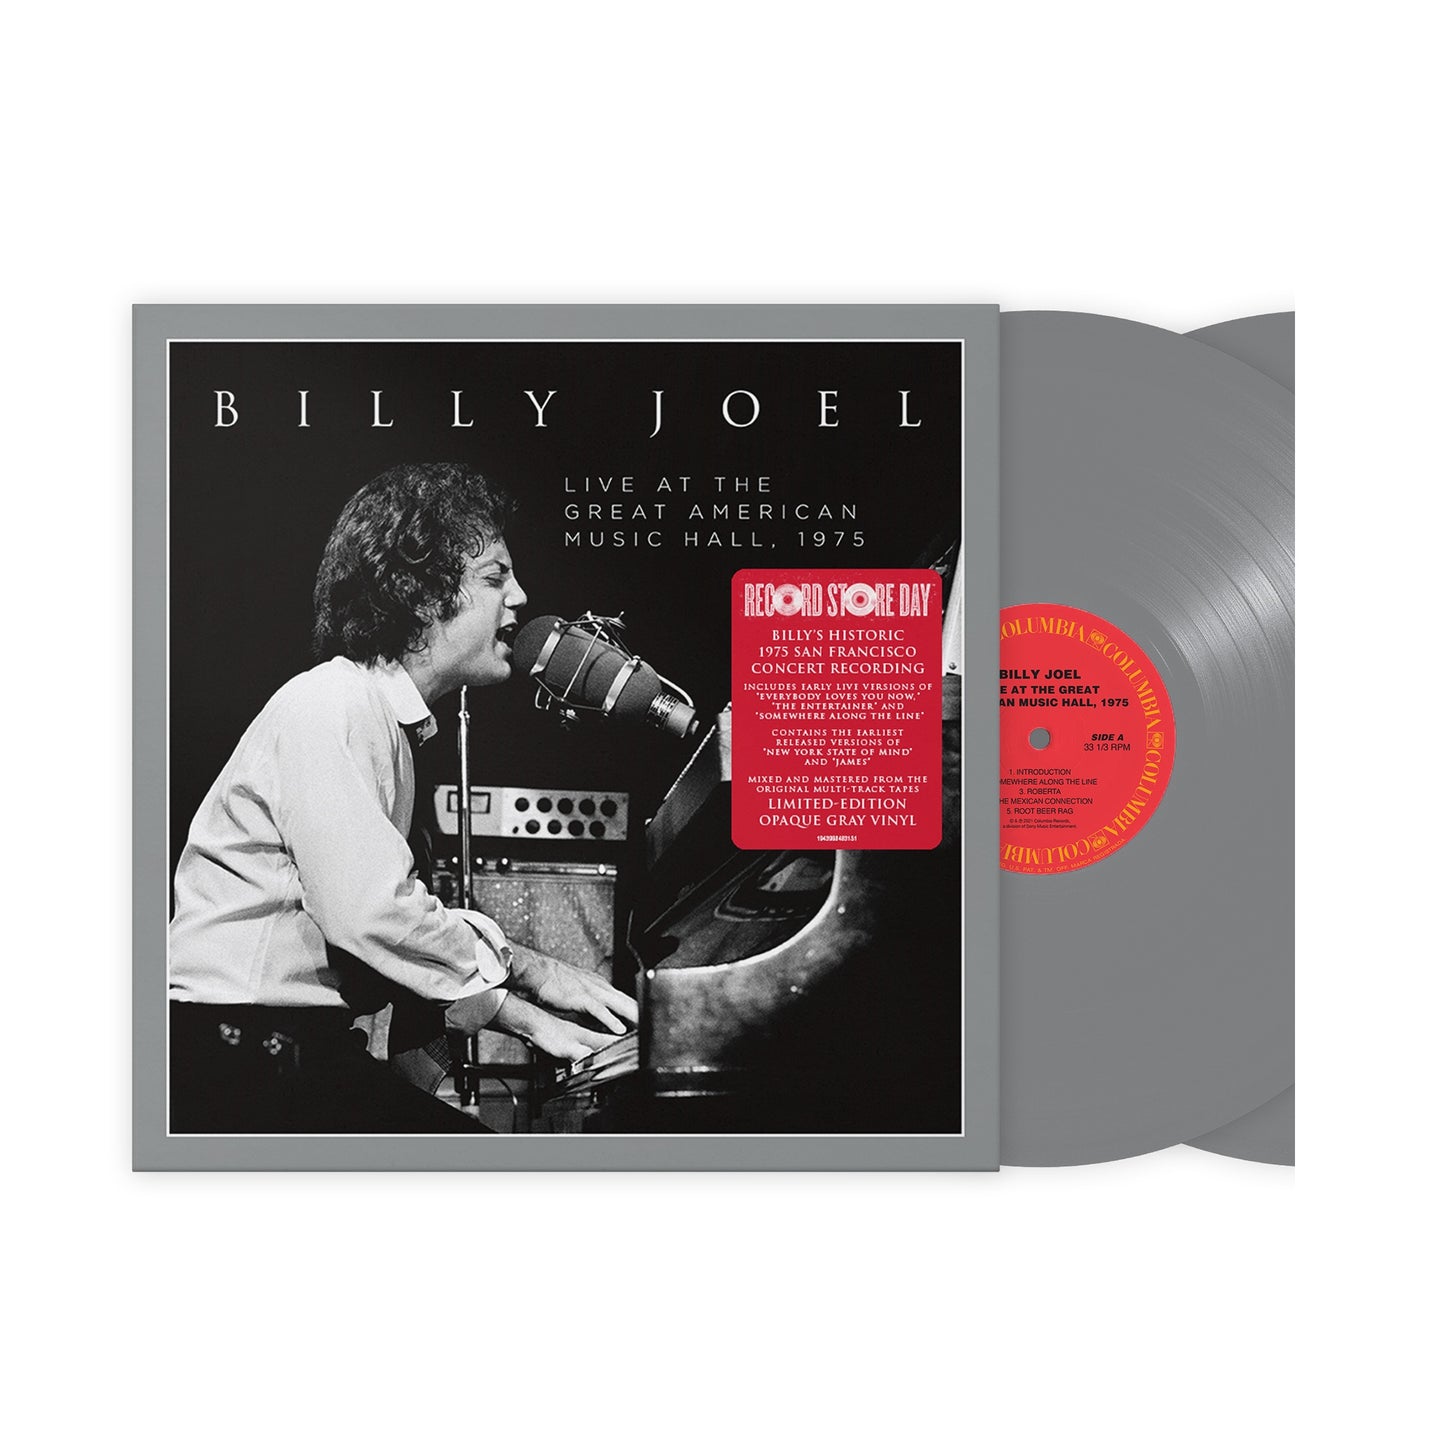 NEW - Billy Joel, Live at the Great American Music Hall 1975 - 2LP RSD 2023